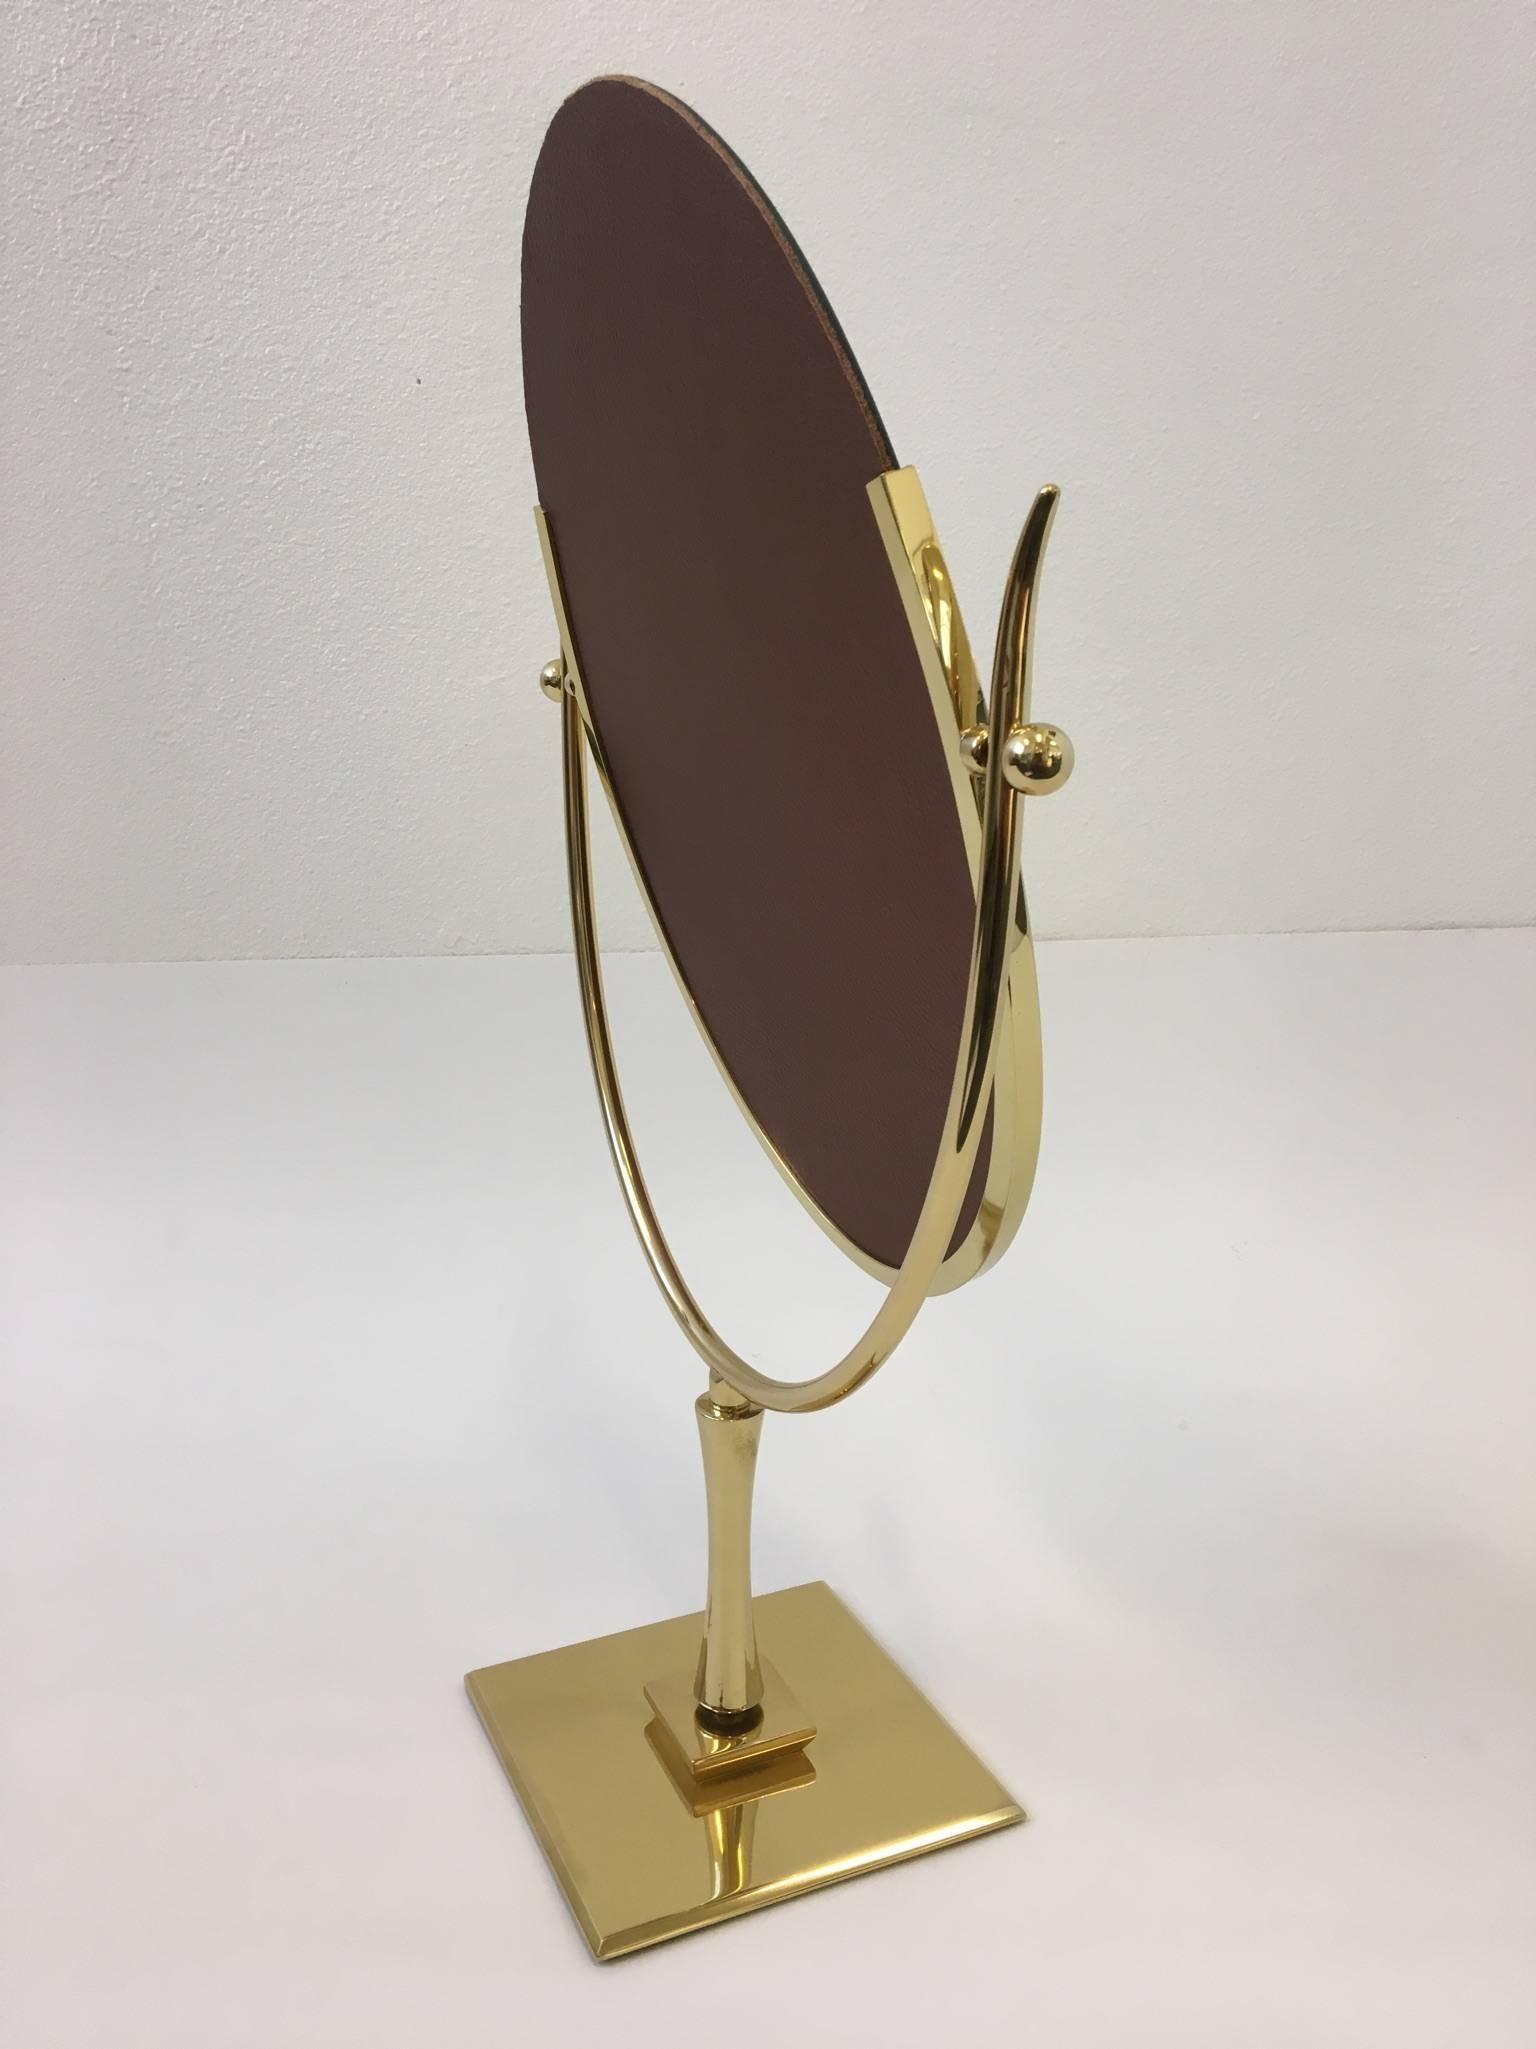 Polished Polish Brass and Leather Vanity Mirror by Charles Hollis Jones